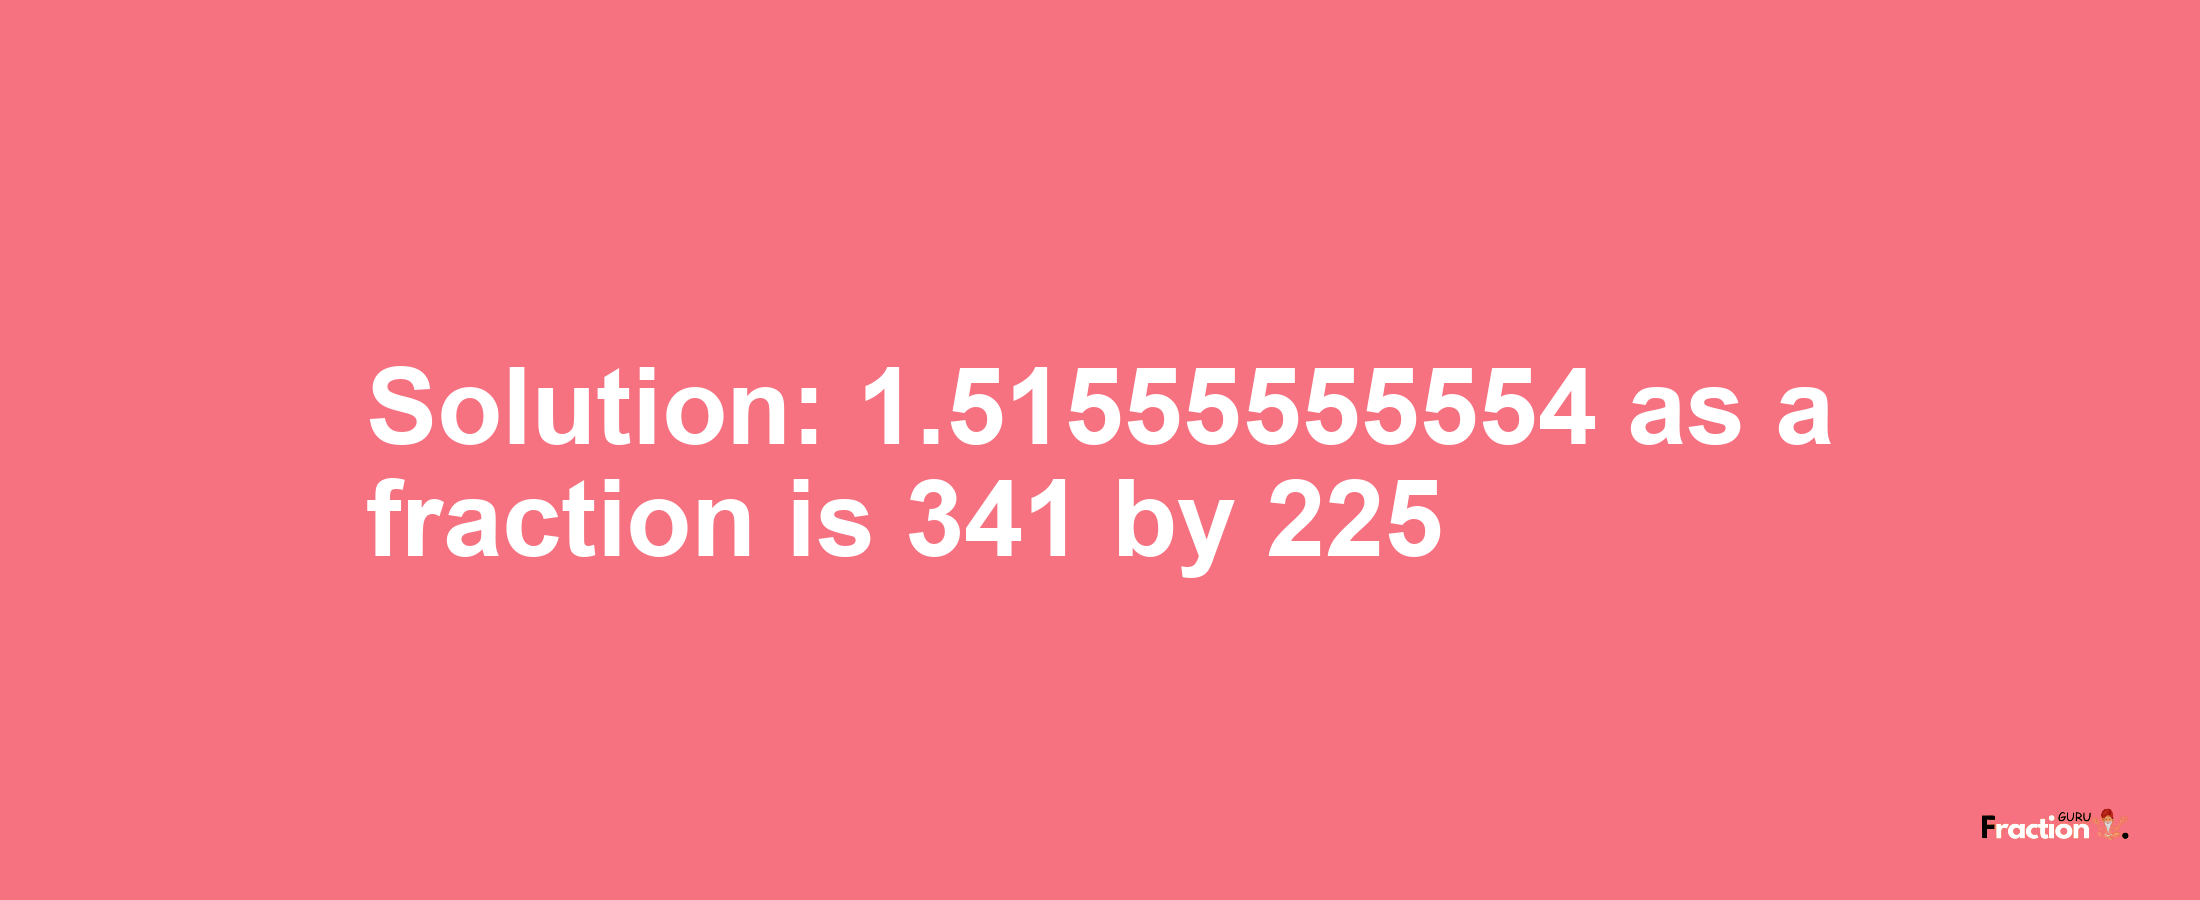 Solution:1.51555555554 as a fraction is 341/225